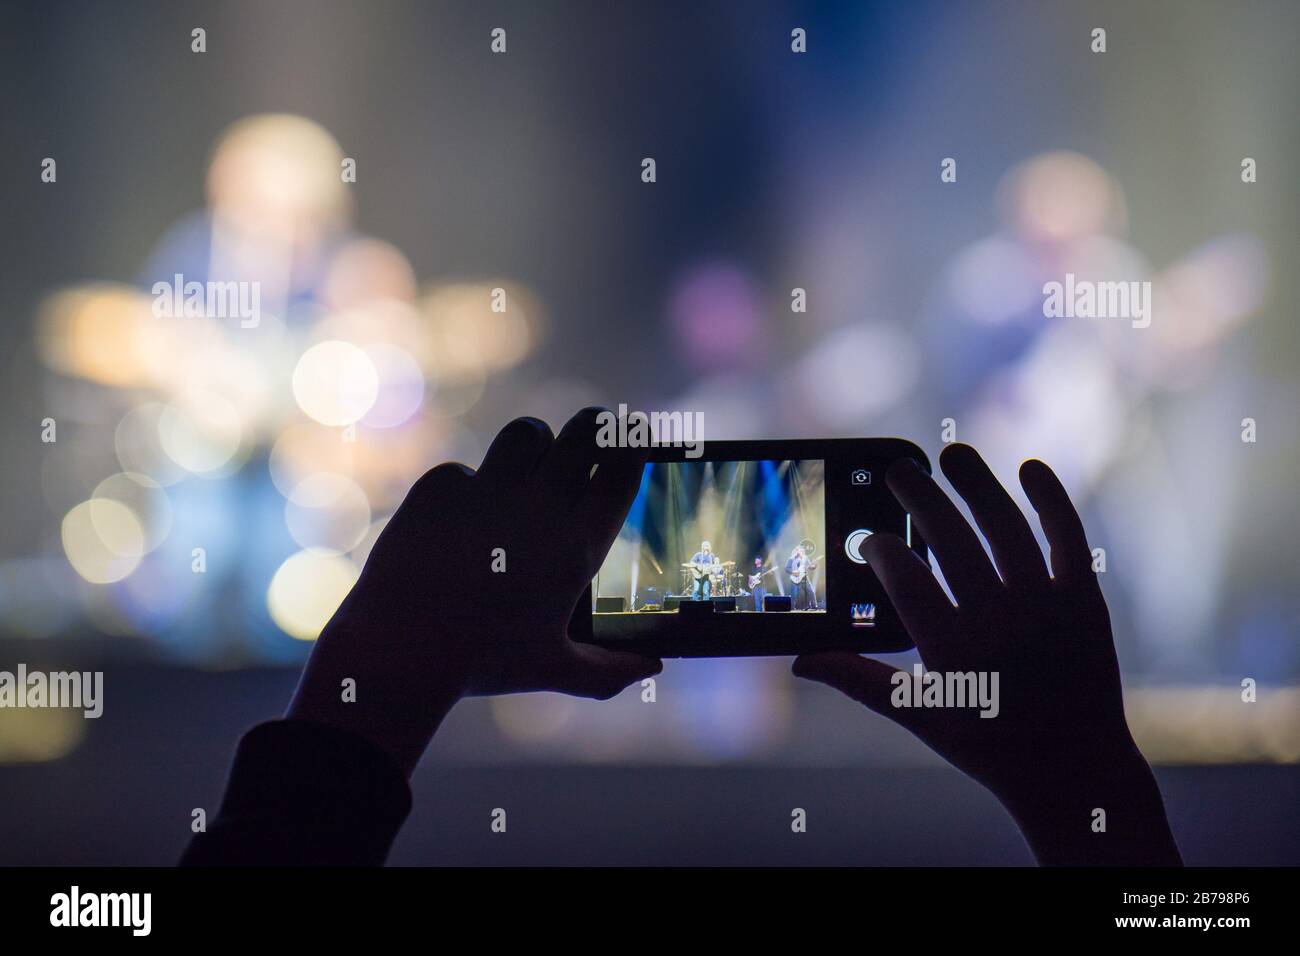 Fan holding smartphone and recording or taking picture during a  concert Stock Photo